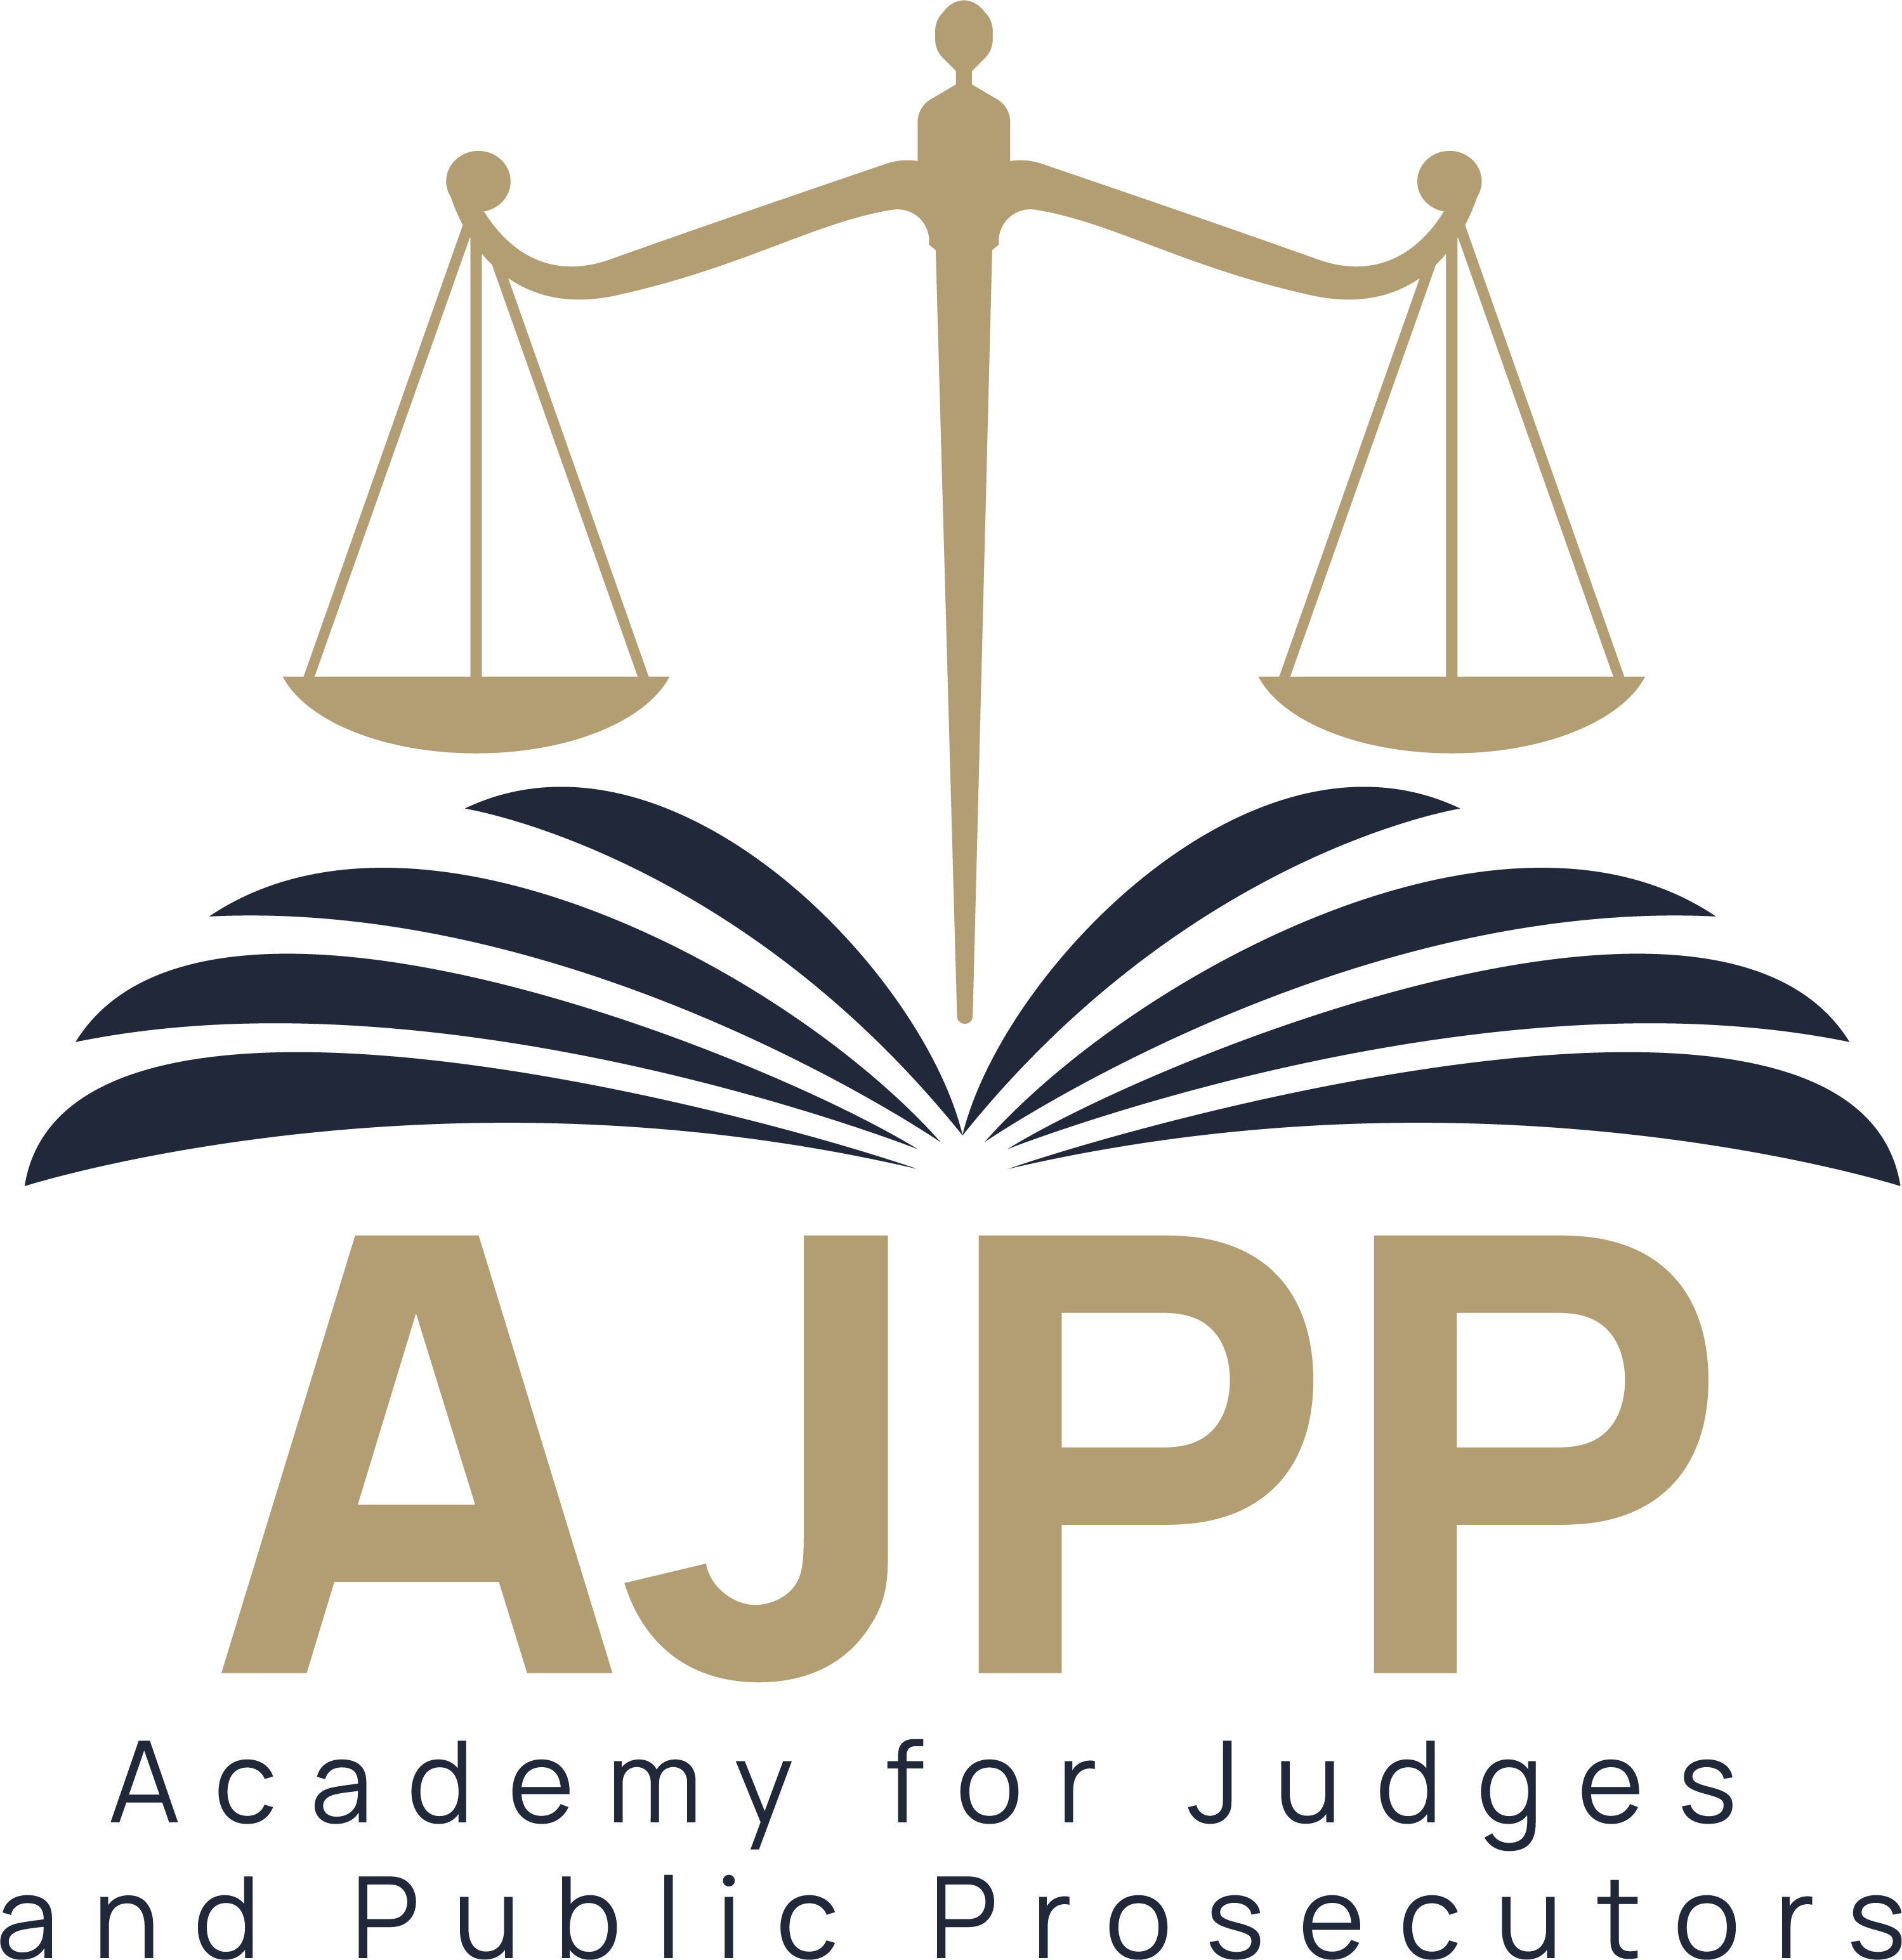 MK: Academy for Judges and Public Prosecutors of the Republic of North Macedonia (AJPP)